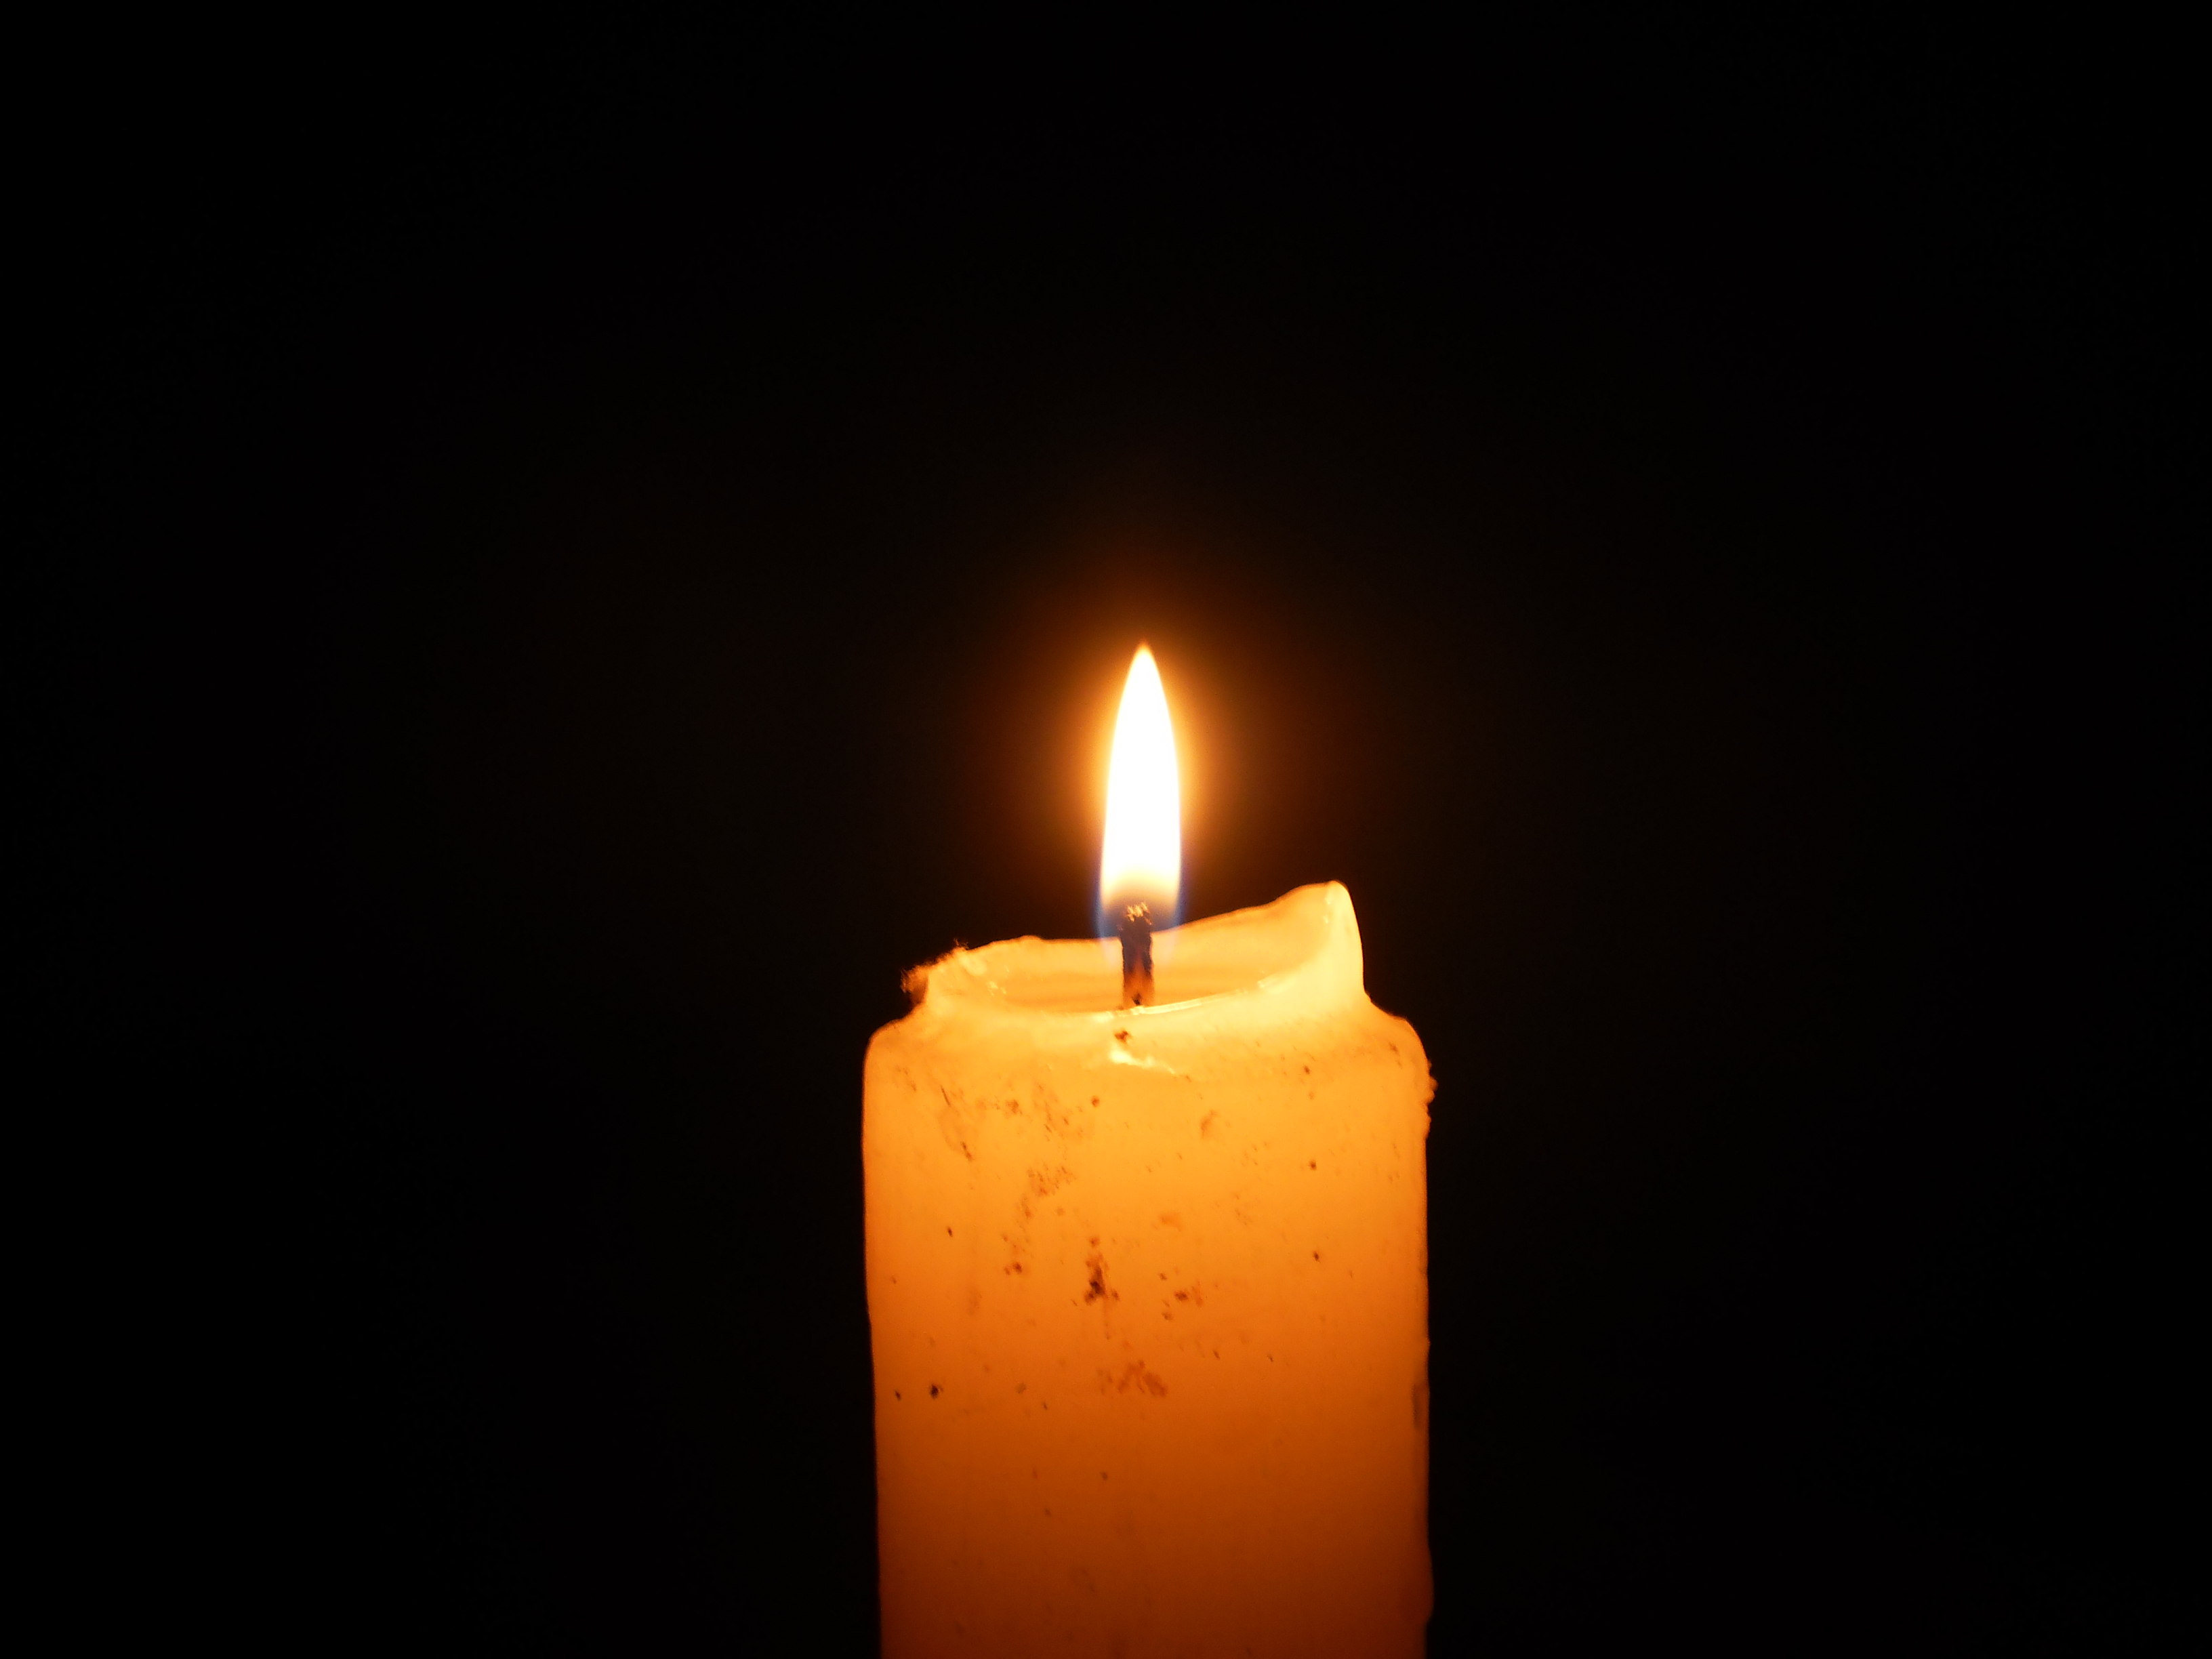 File:Lighted Candle At Night5.JPG - Wikimedia Commons - Cliparts.co